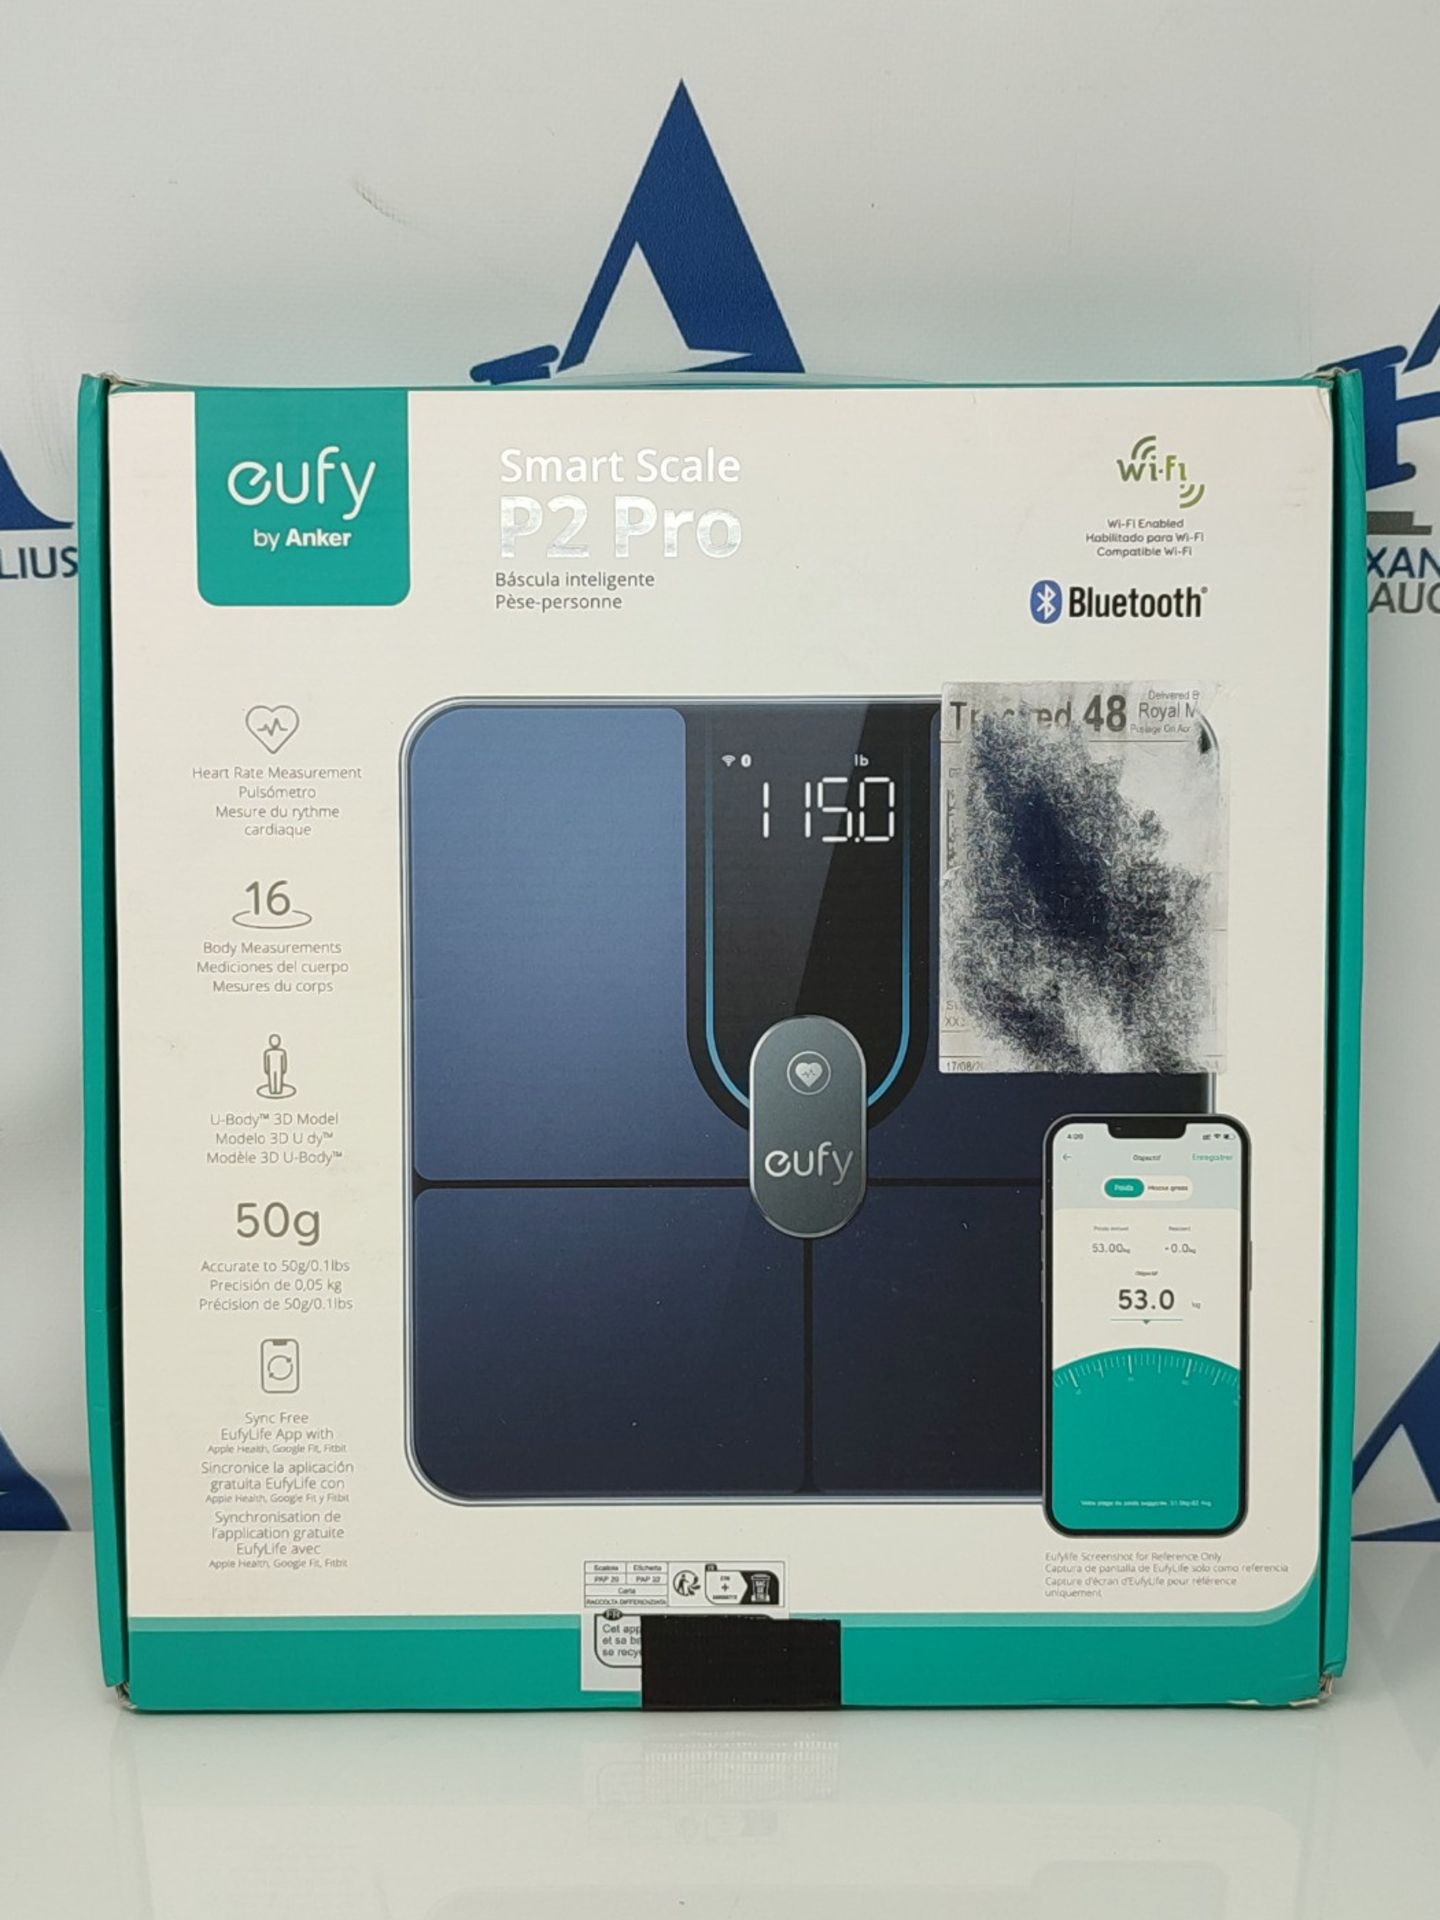 RRP £50.00 eufy Smart Scale P2 Pro, Digital Bathroom Scale with Wi-Fi Bluetooth, 16 Measurements - Image 2 of 3